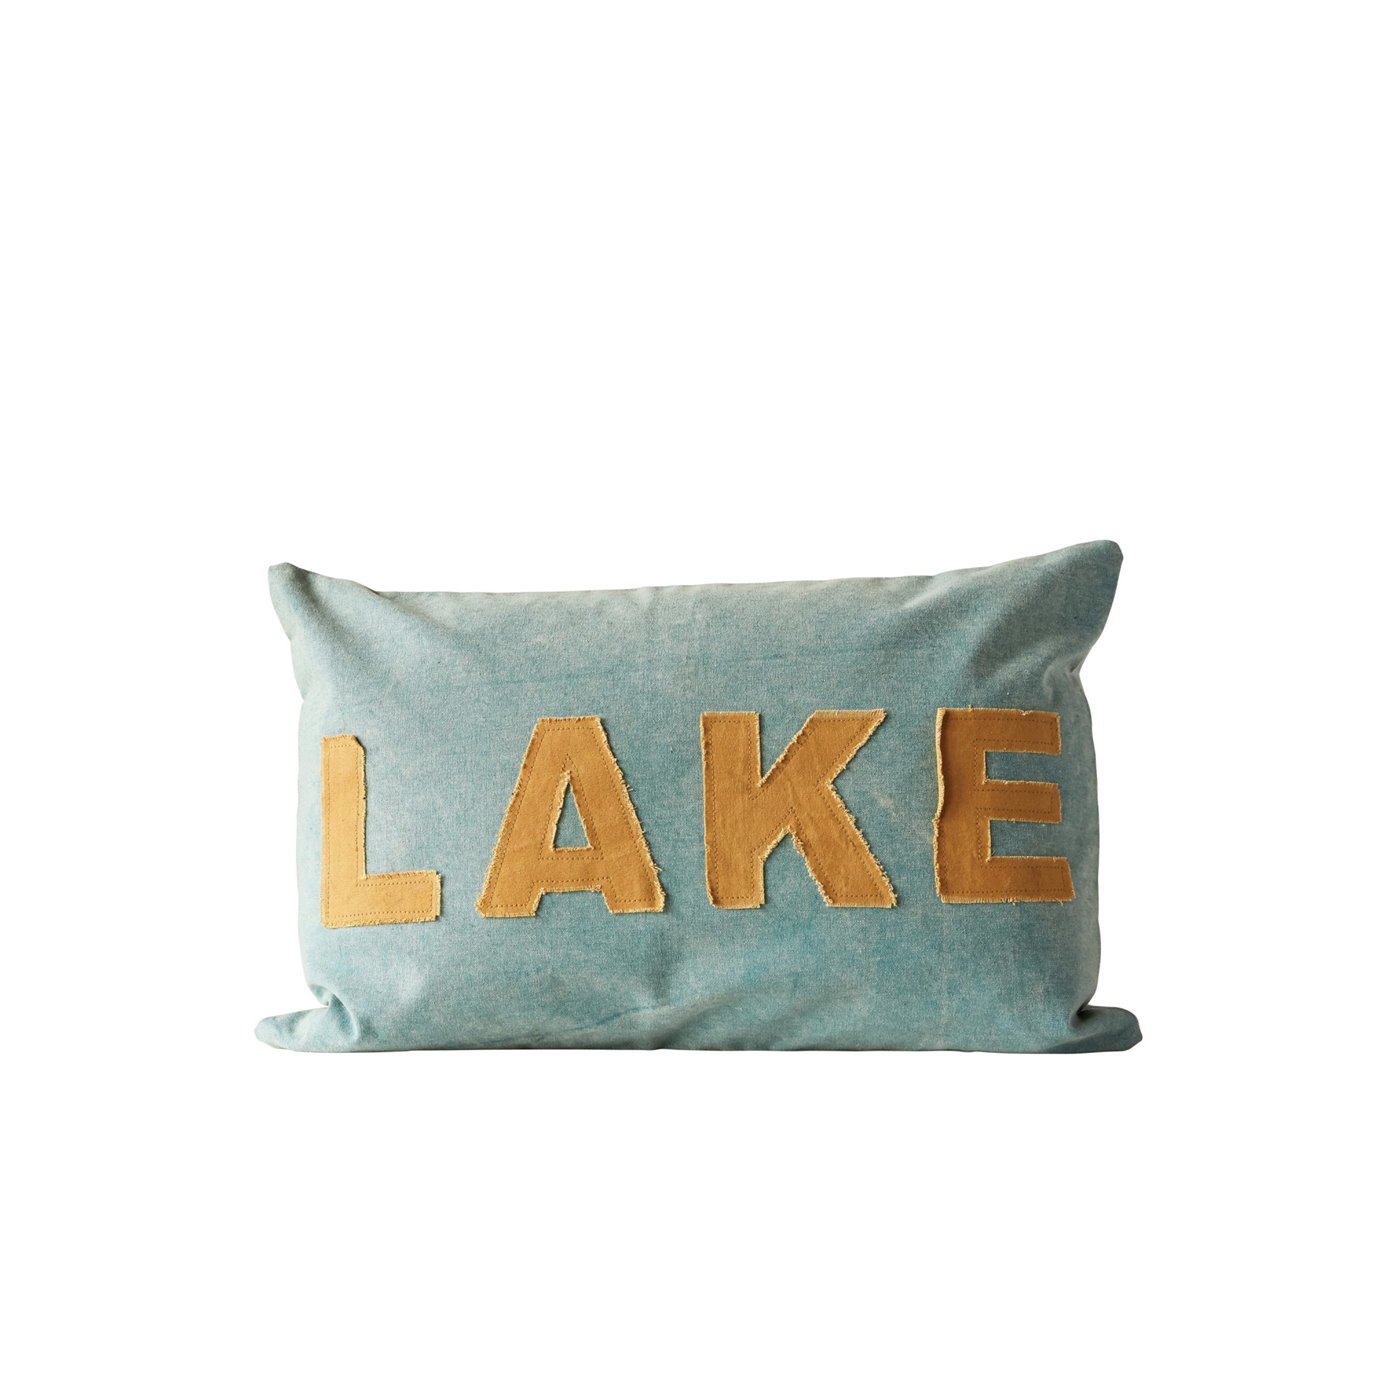 Green Cotton Canvas Pillow with Brown "LAKE" Lettering